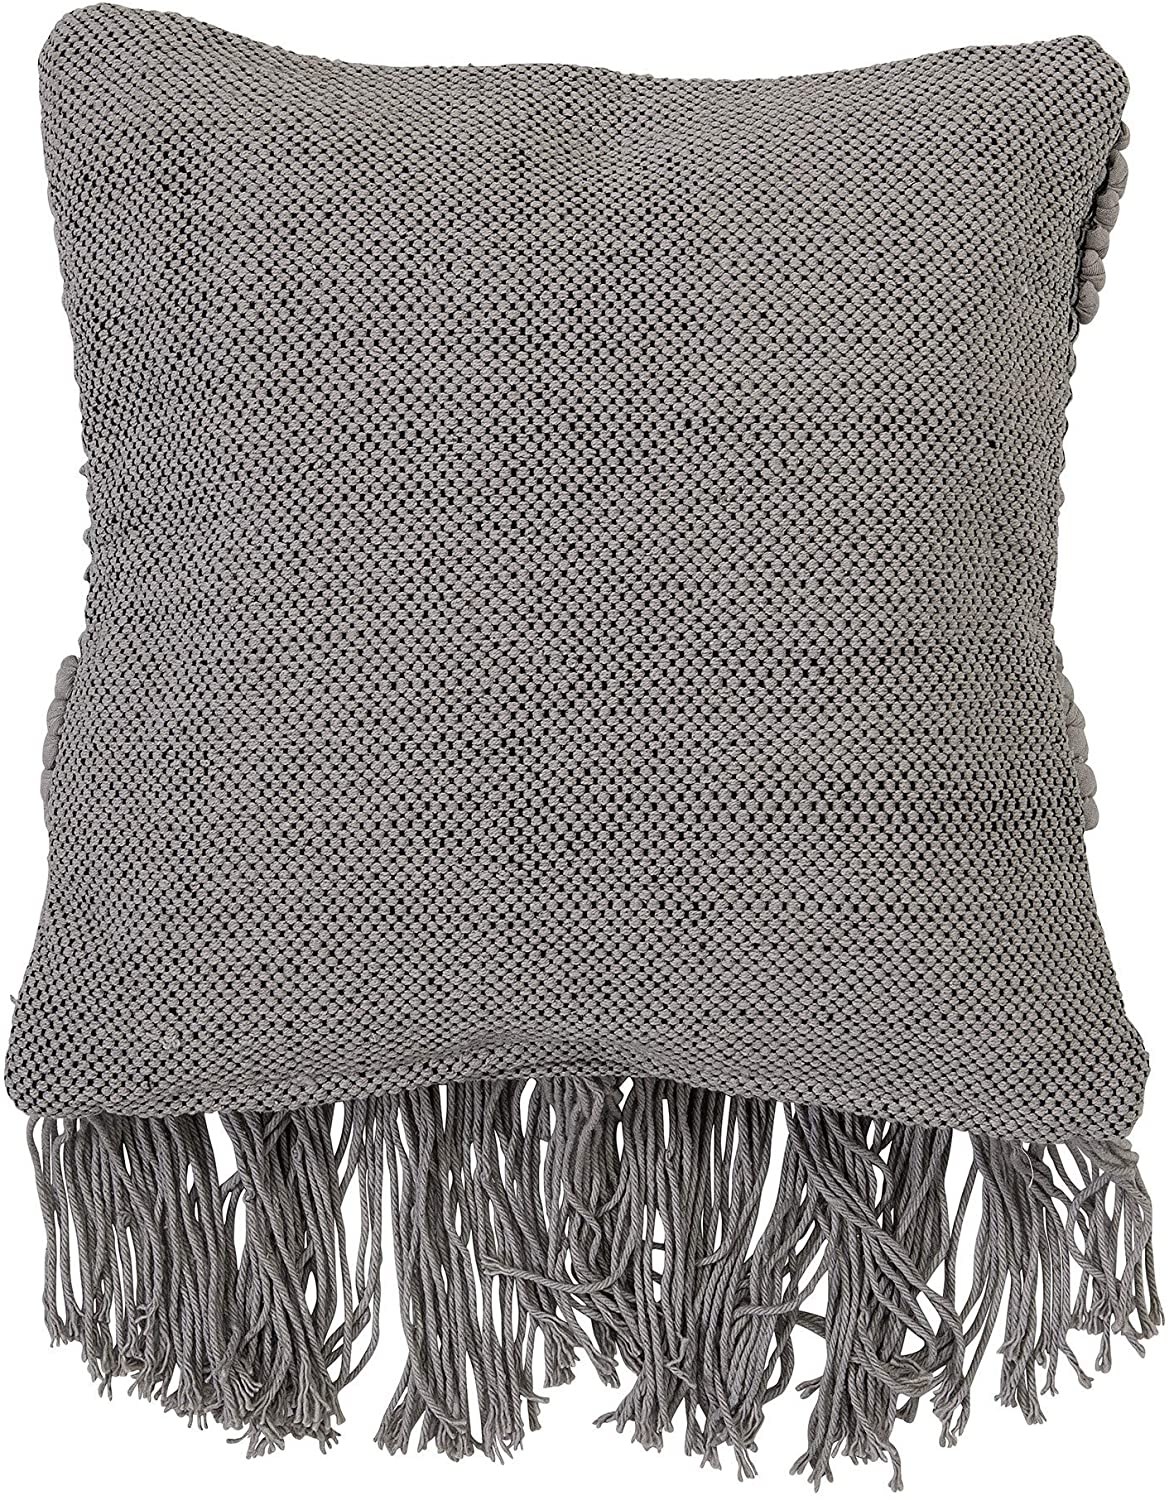 Textured Pillow with Fringe, Gray Cotton, 18" x 18" - Image 1